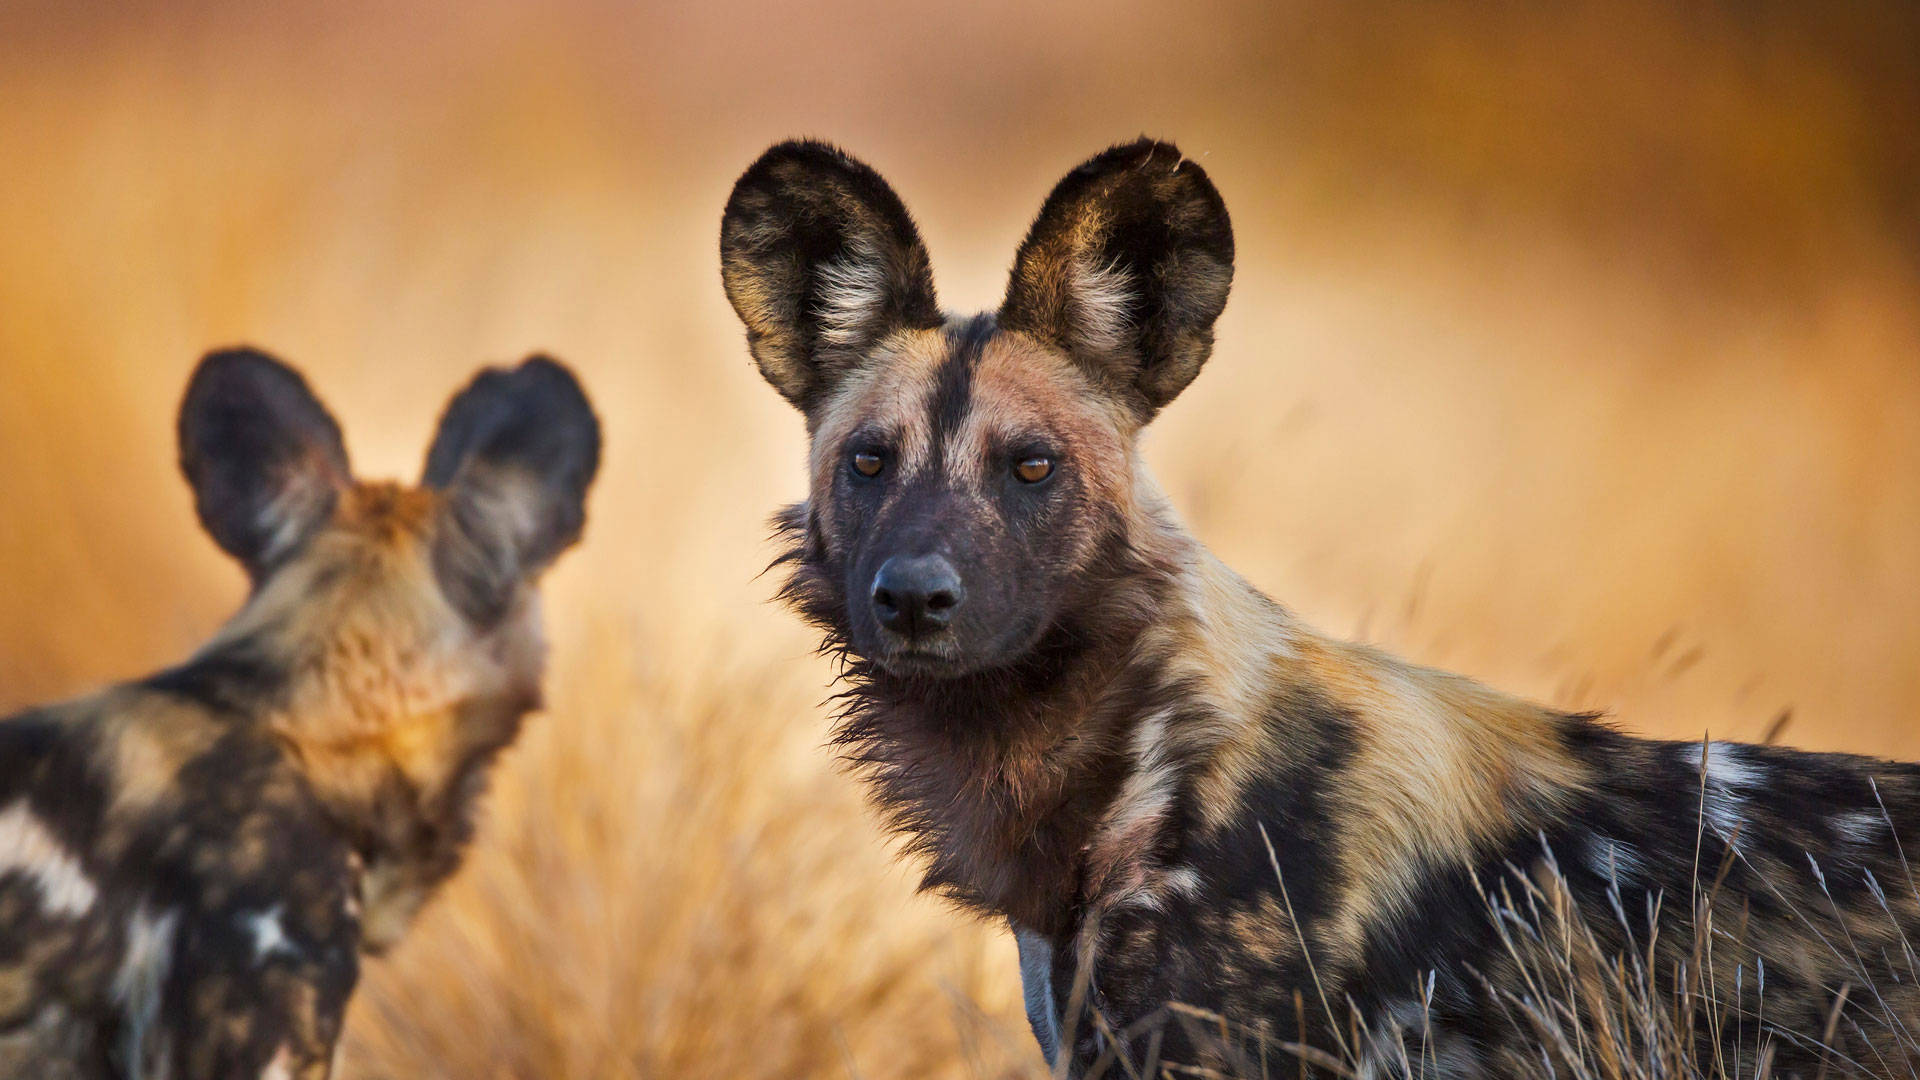 African Animals Two Wild Dogs